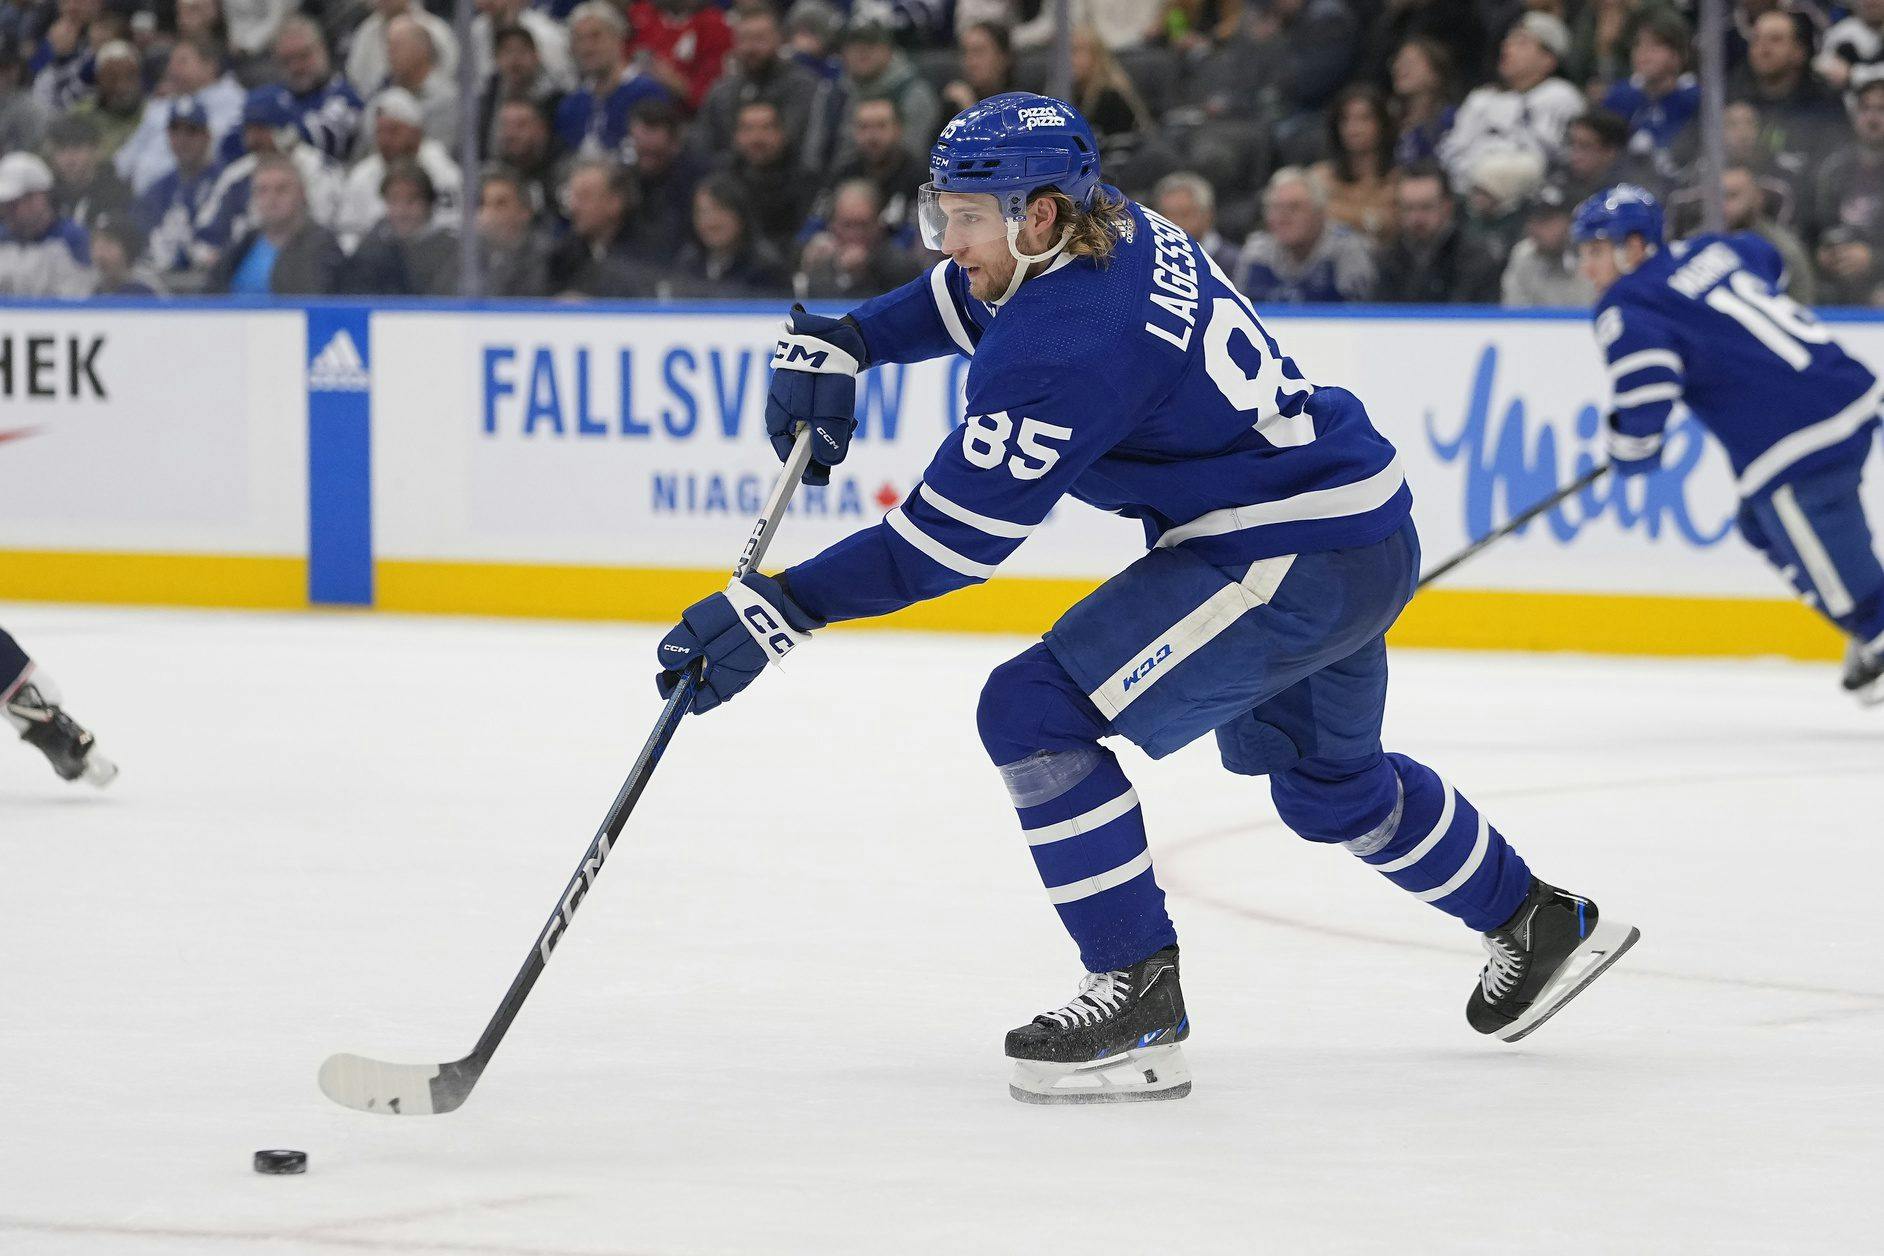 Anaheim Ducks claim William Lagesson off waivers from Toronto Maple Leafs